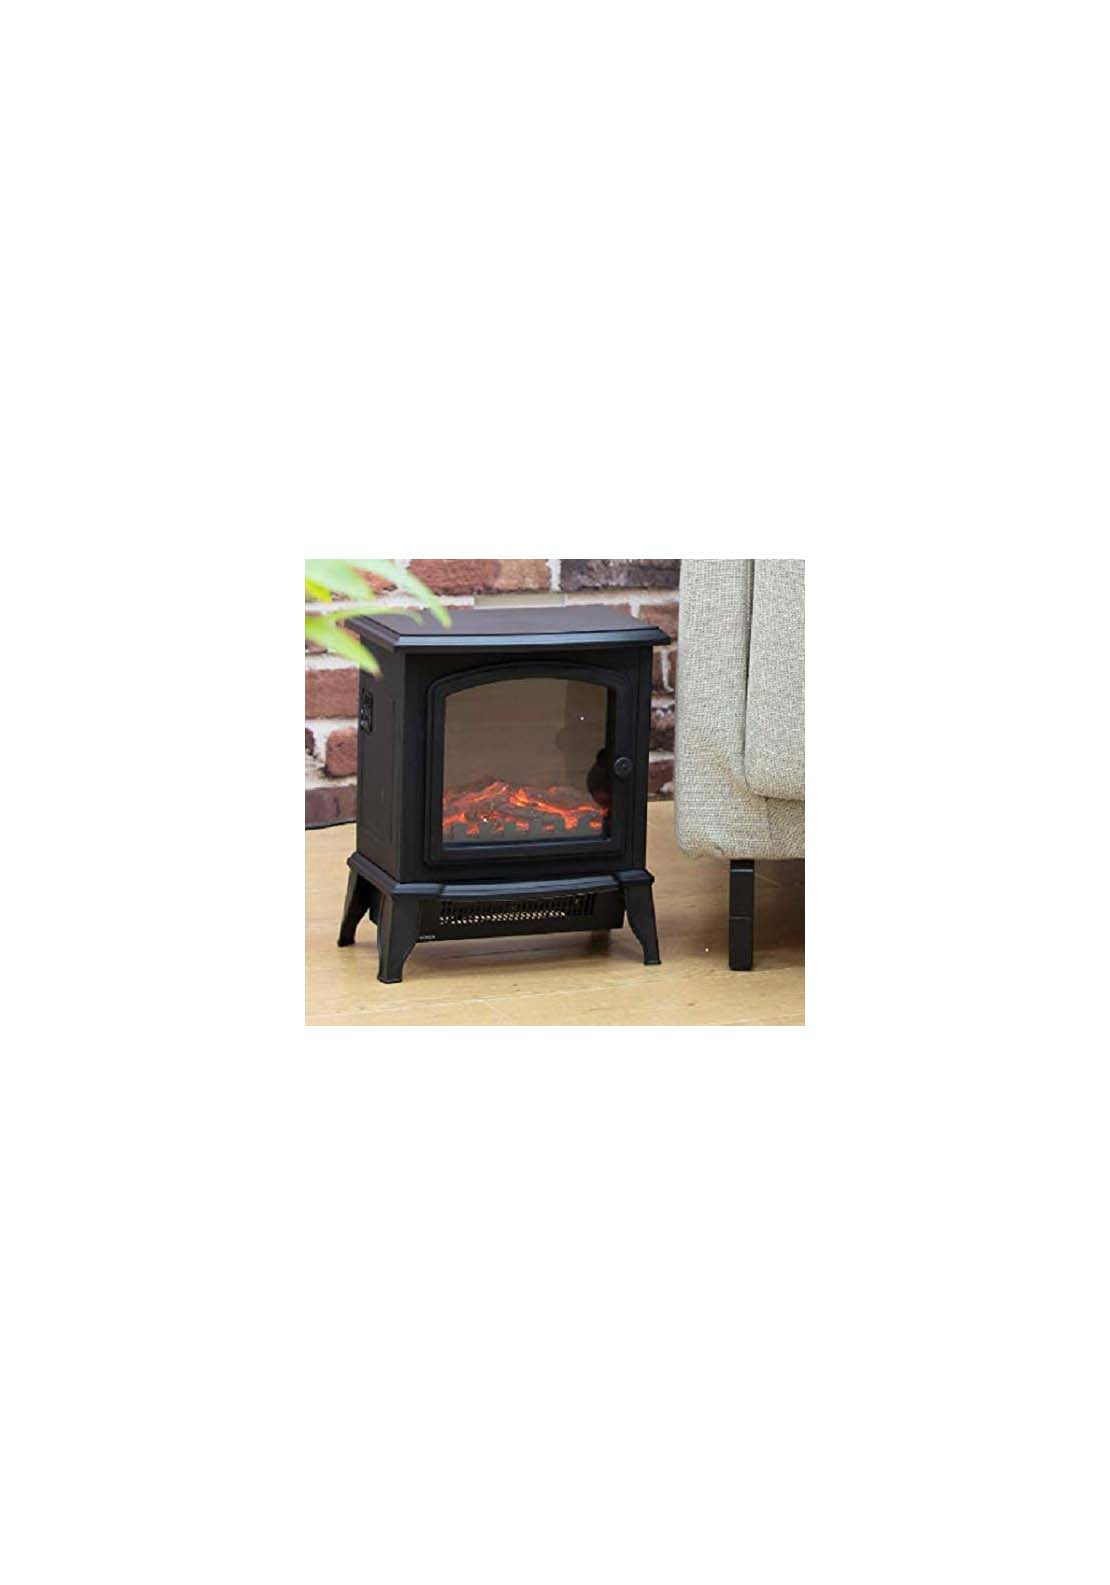 Warmlite Mable Compact Stove Fire | WL46021 - Black 2 Shaws Department Stores